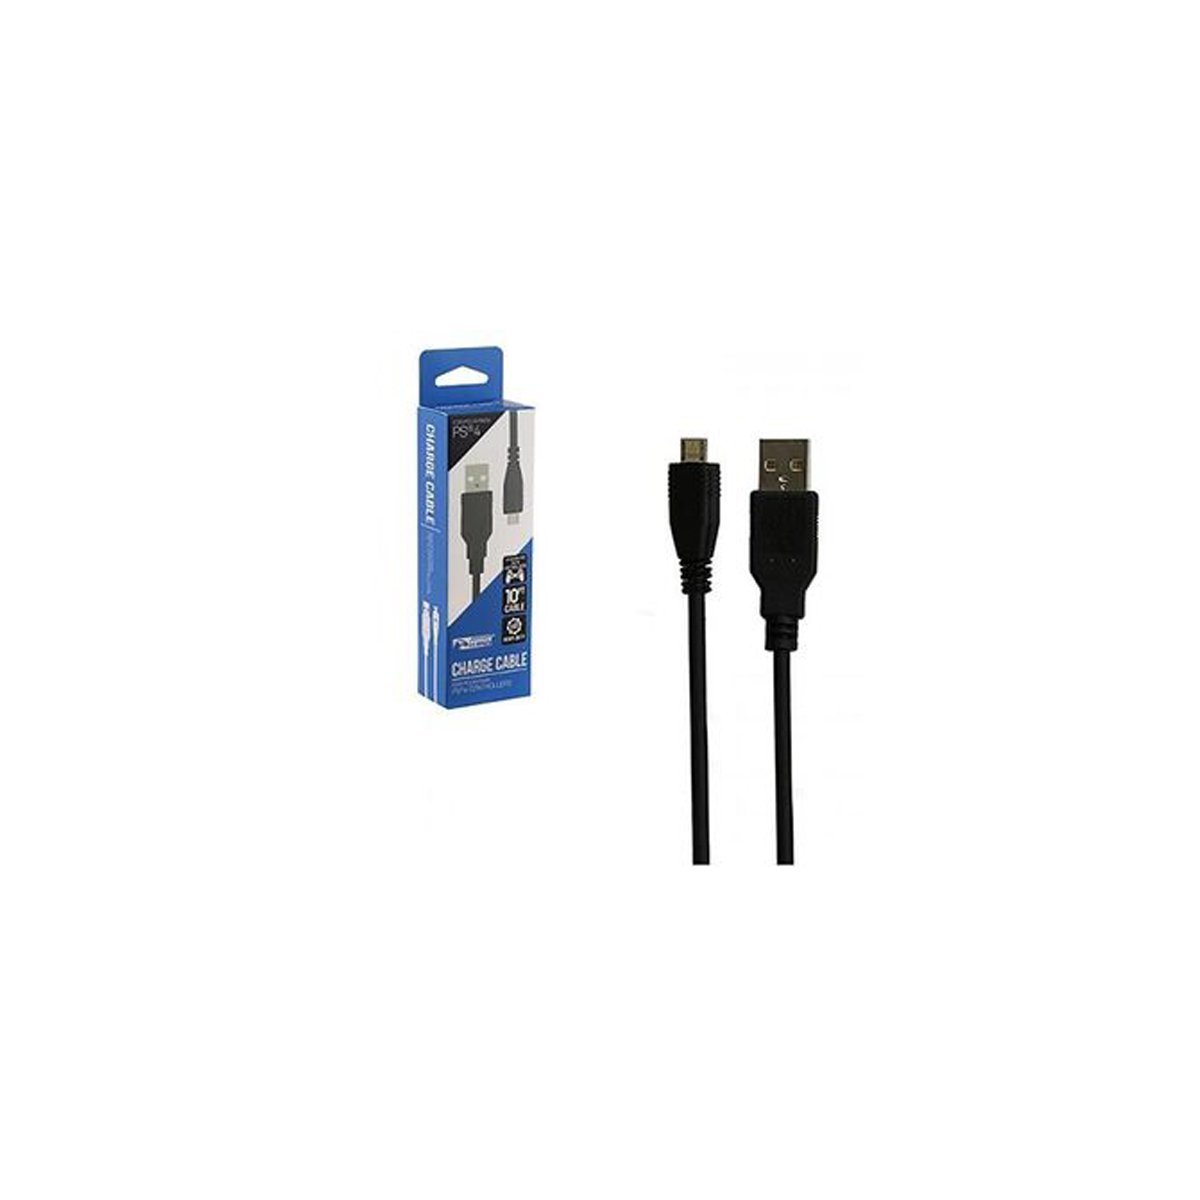 Ps4 Charge Cable